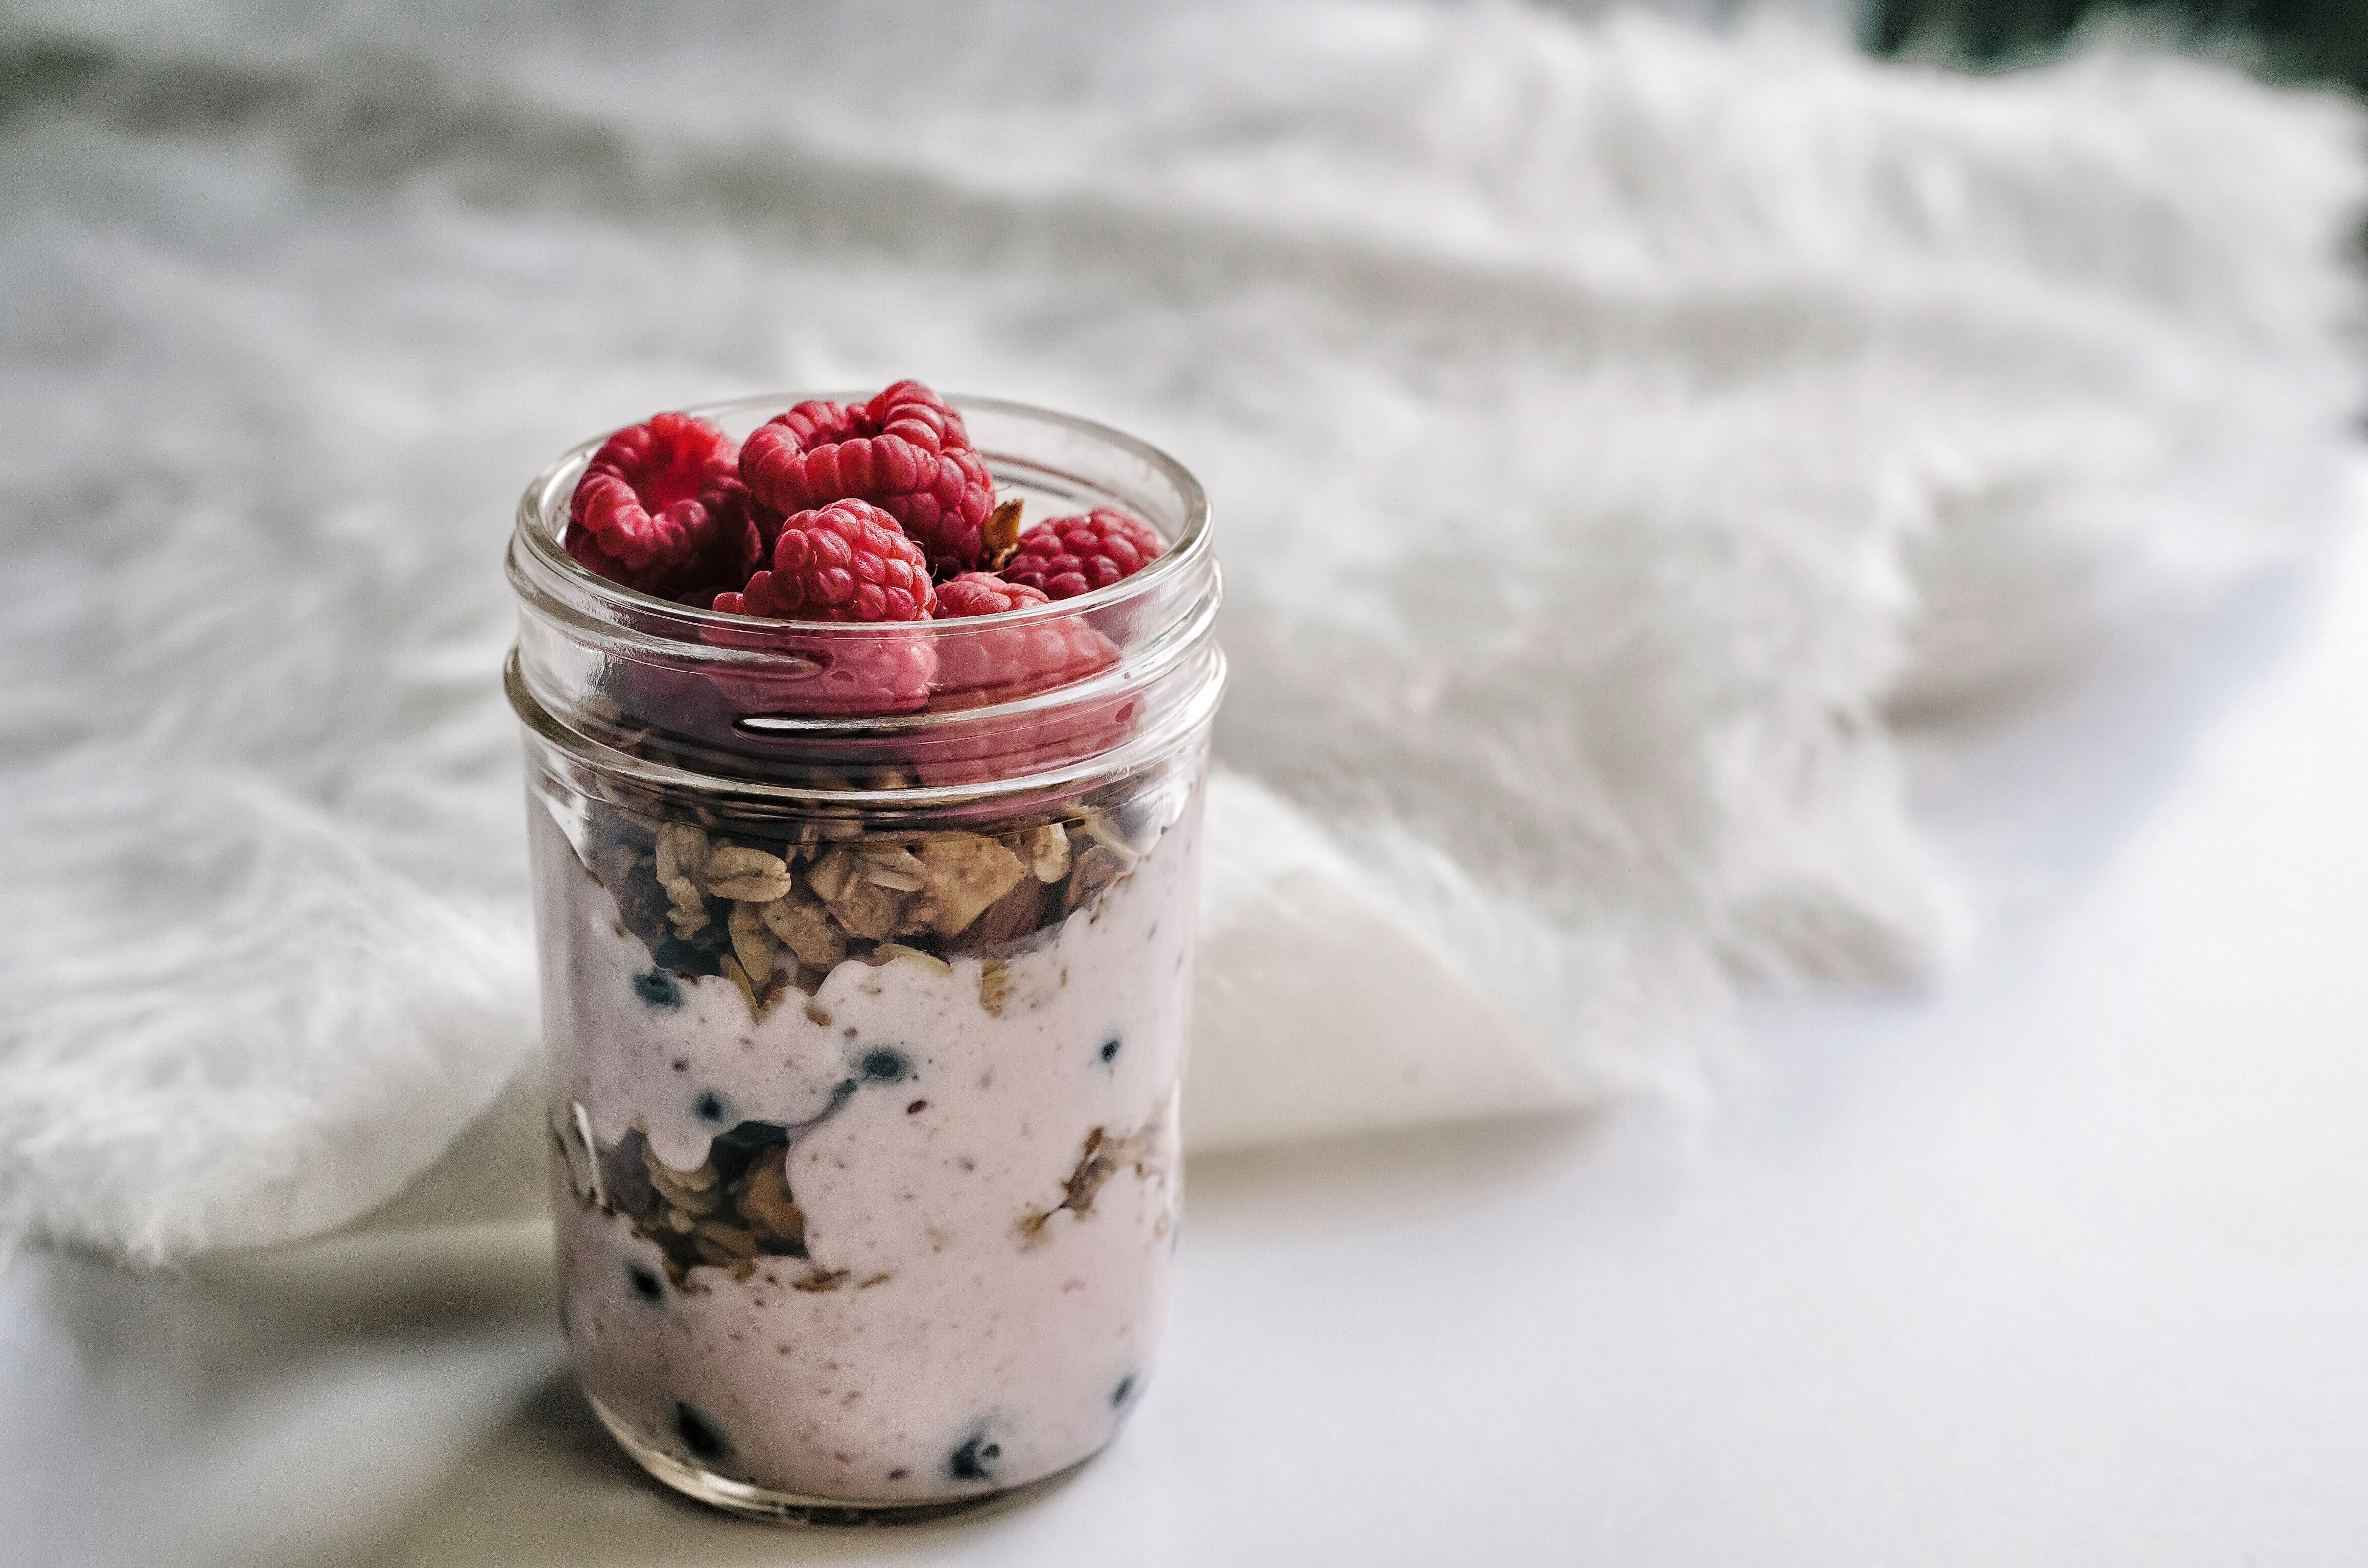 Overnight Oats was the 10th most trending food search globally in 2021. Credit: Unsplash Photo